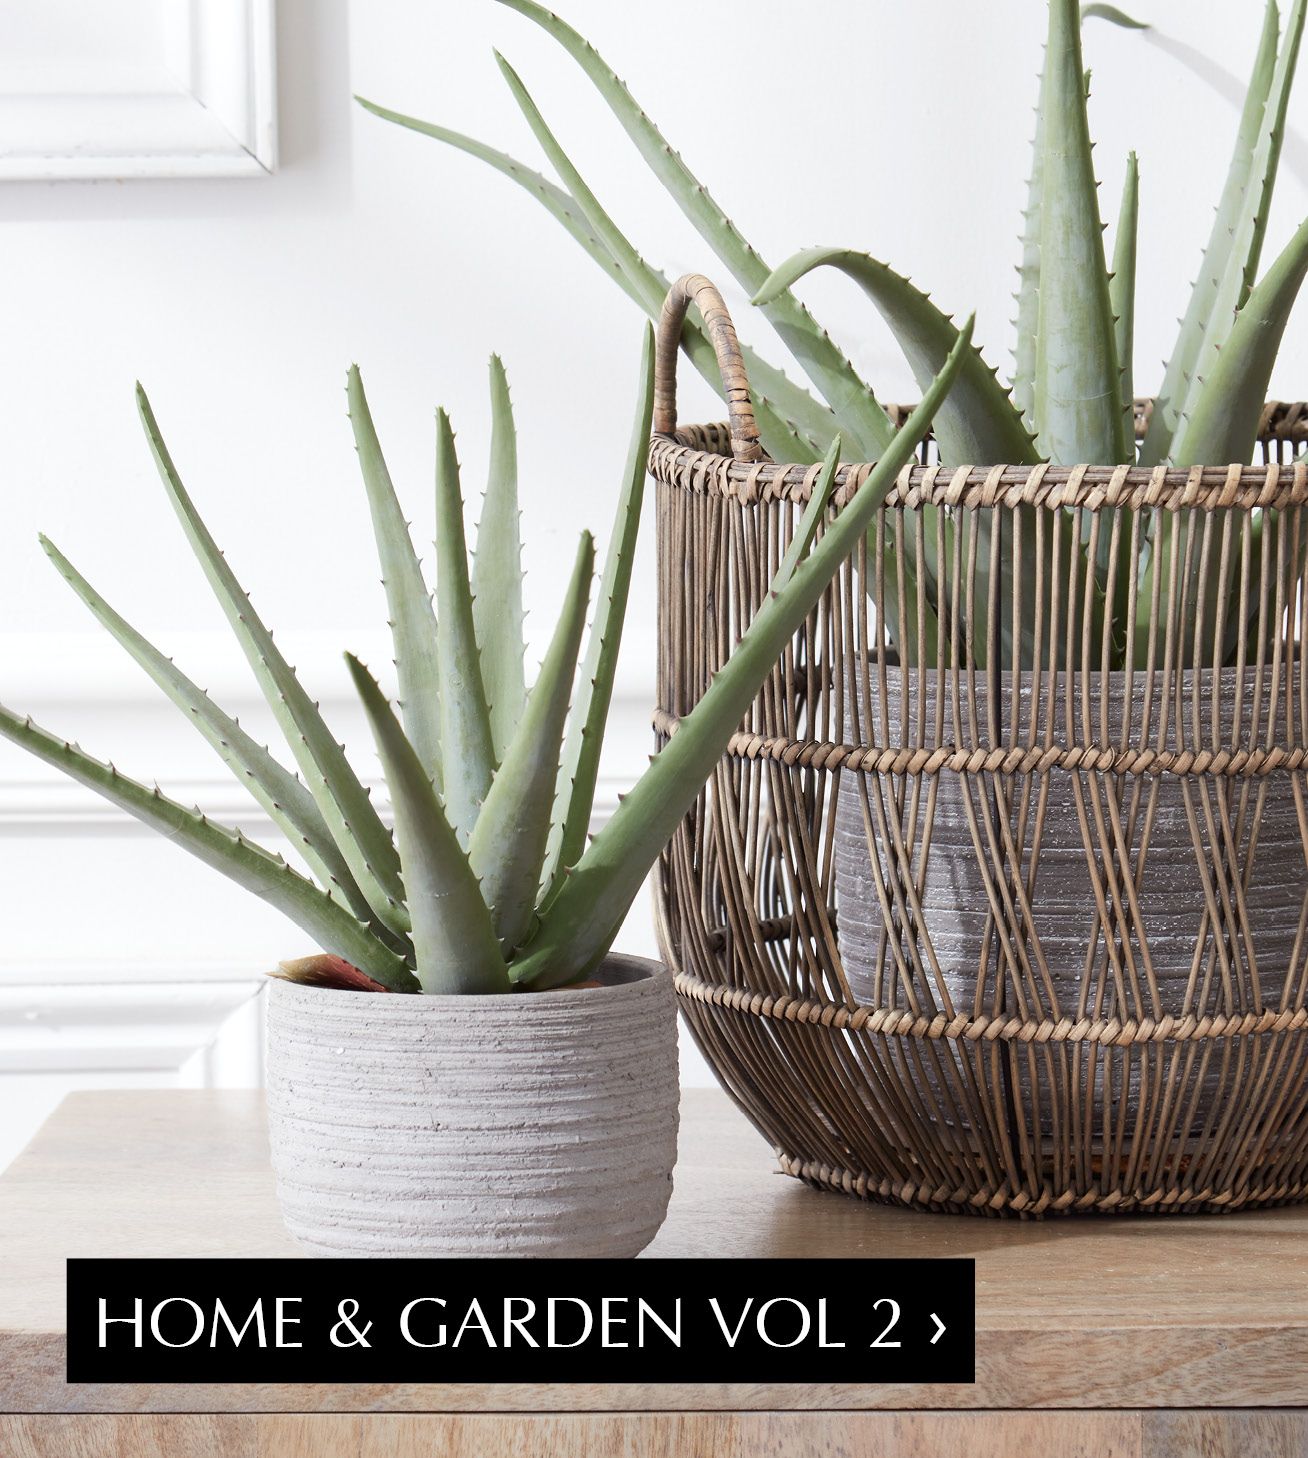 Link to Home & Garden Vol 2 Catalog; 2 Aloe plants in cement pots with one plant in a basketra